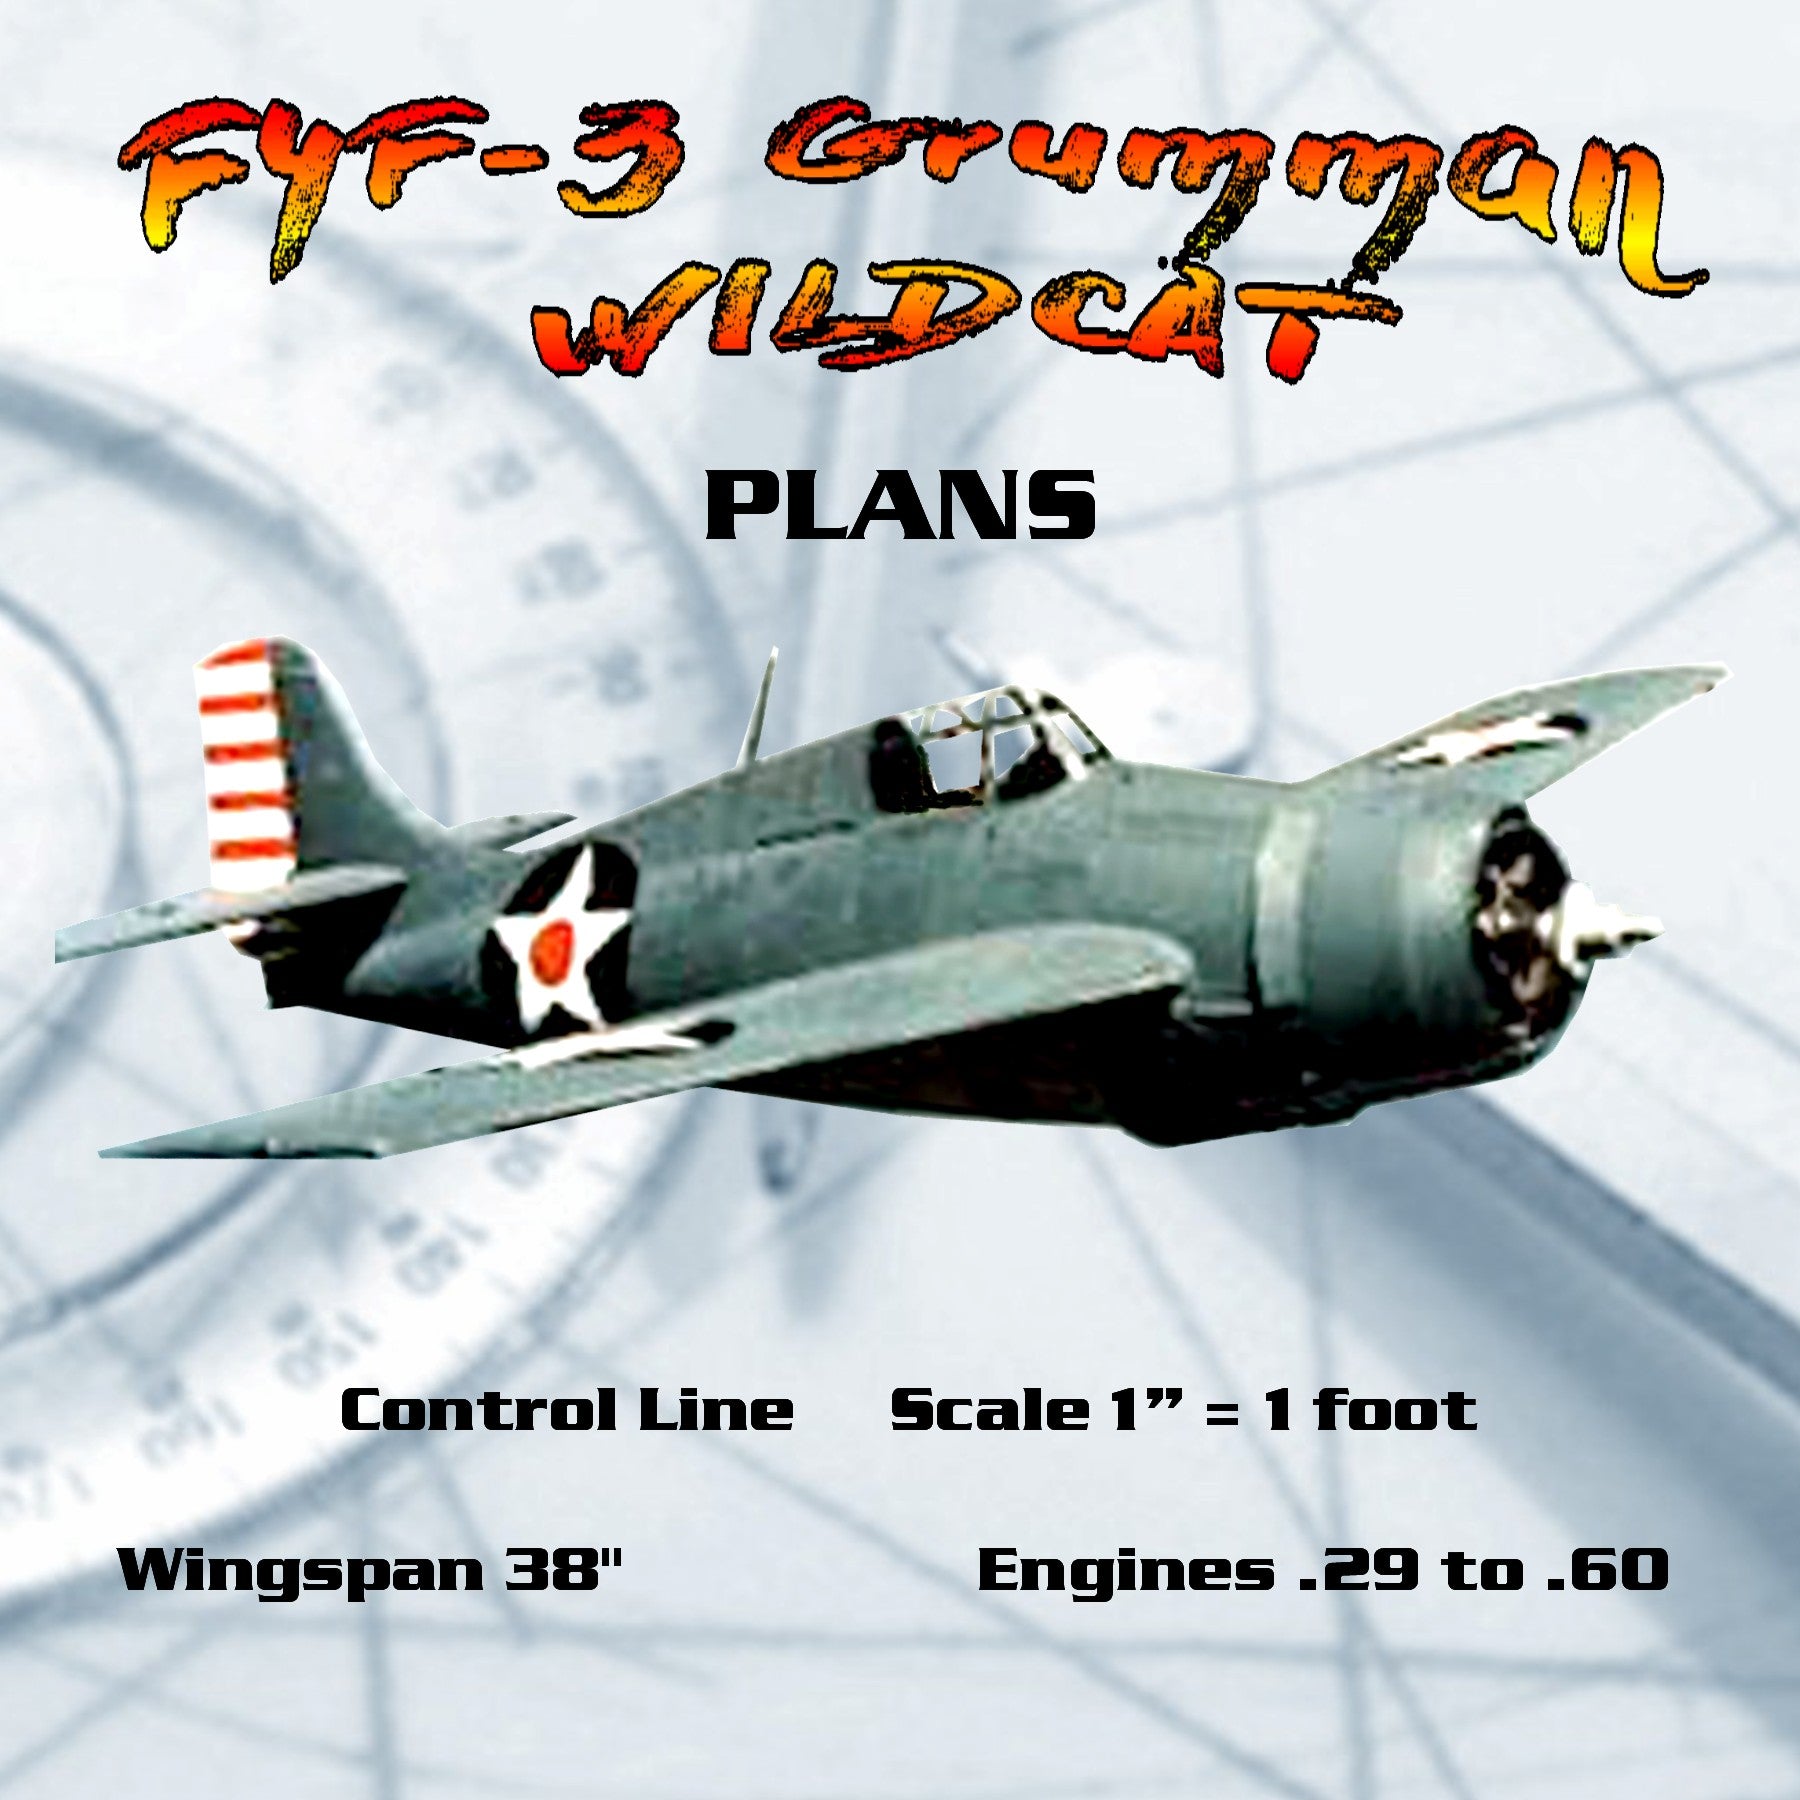 Full Size Printed Plans  Control Line  Scale 1:12 F4F-3 Grumman WILDCAT detailed plans